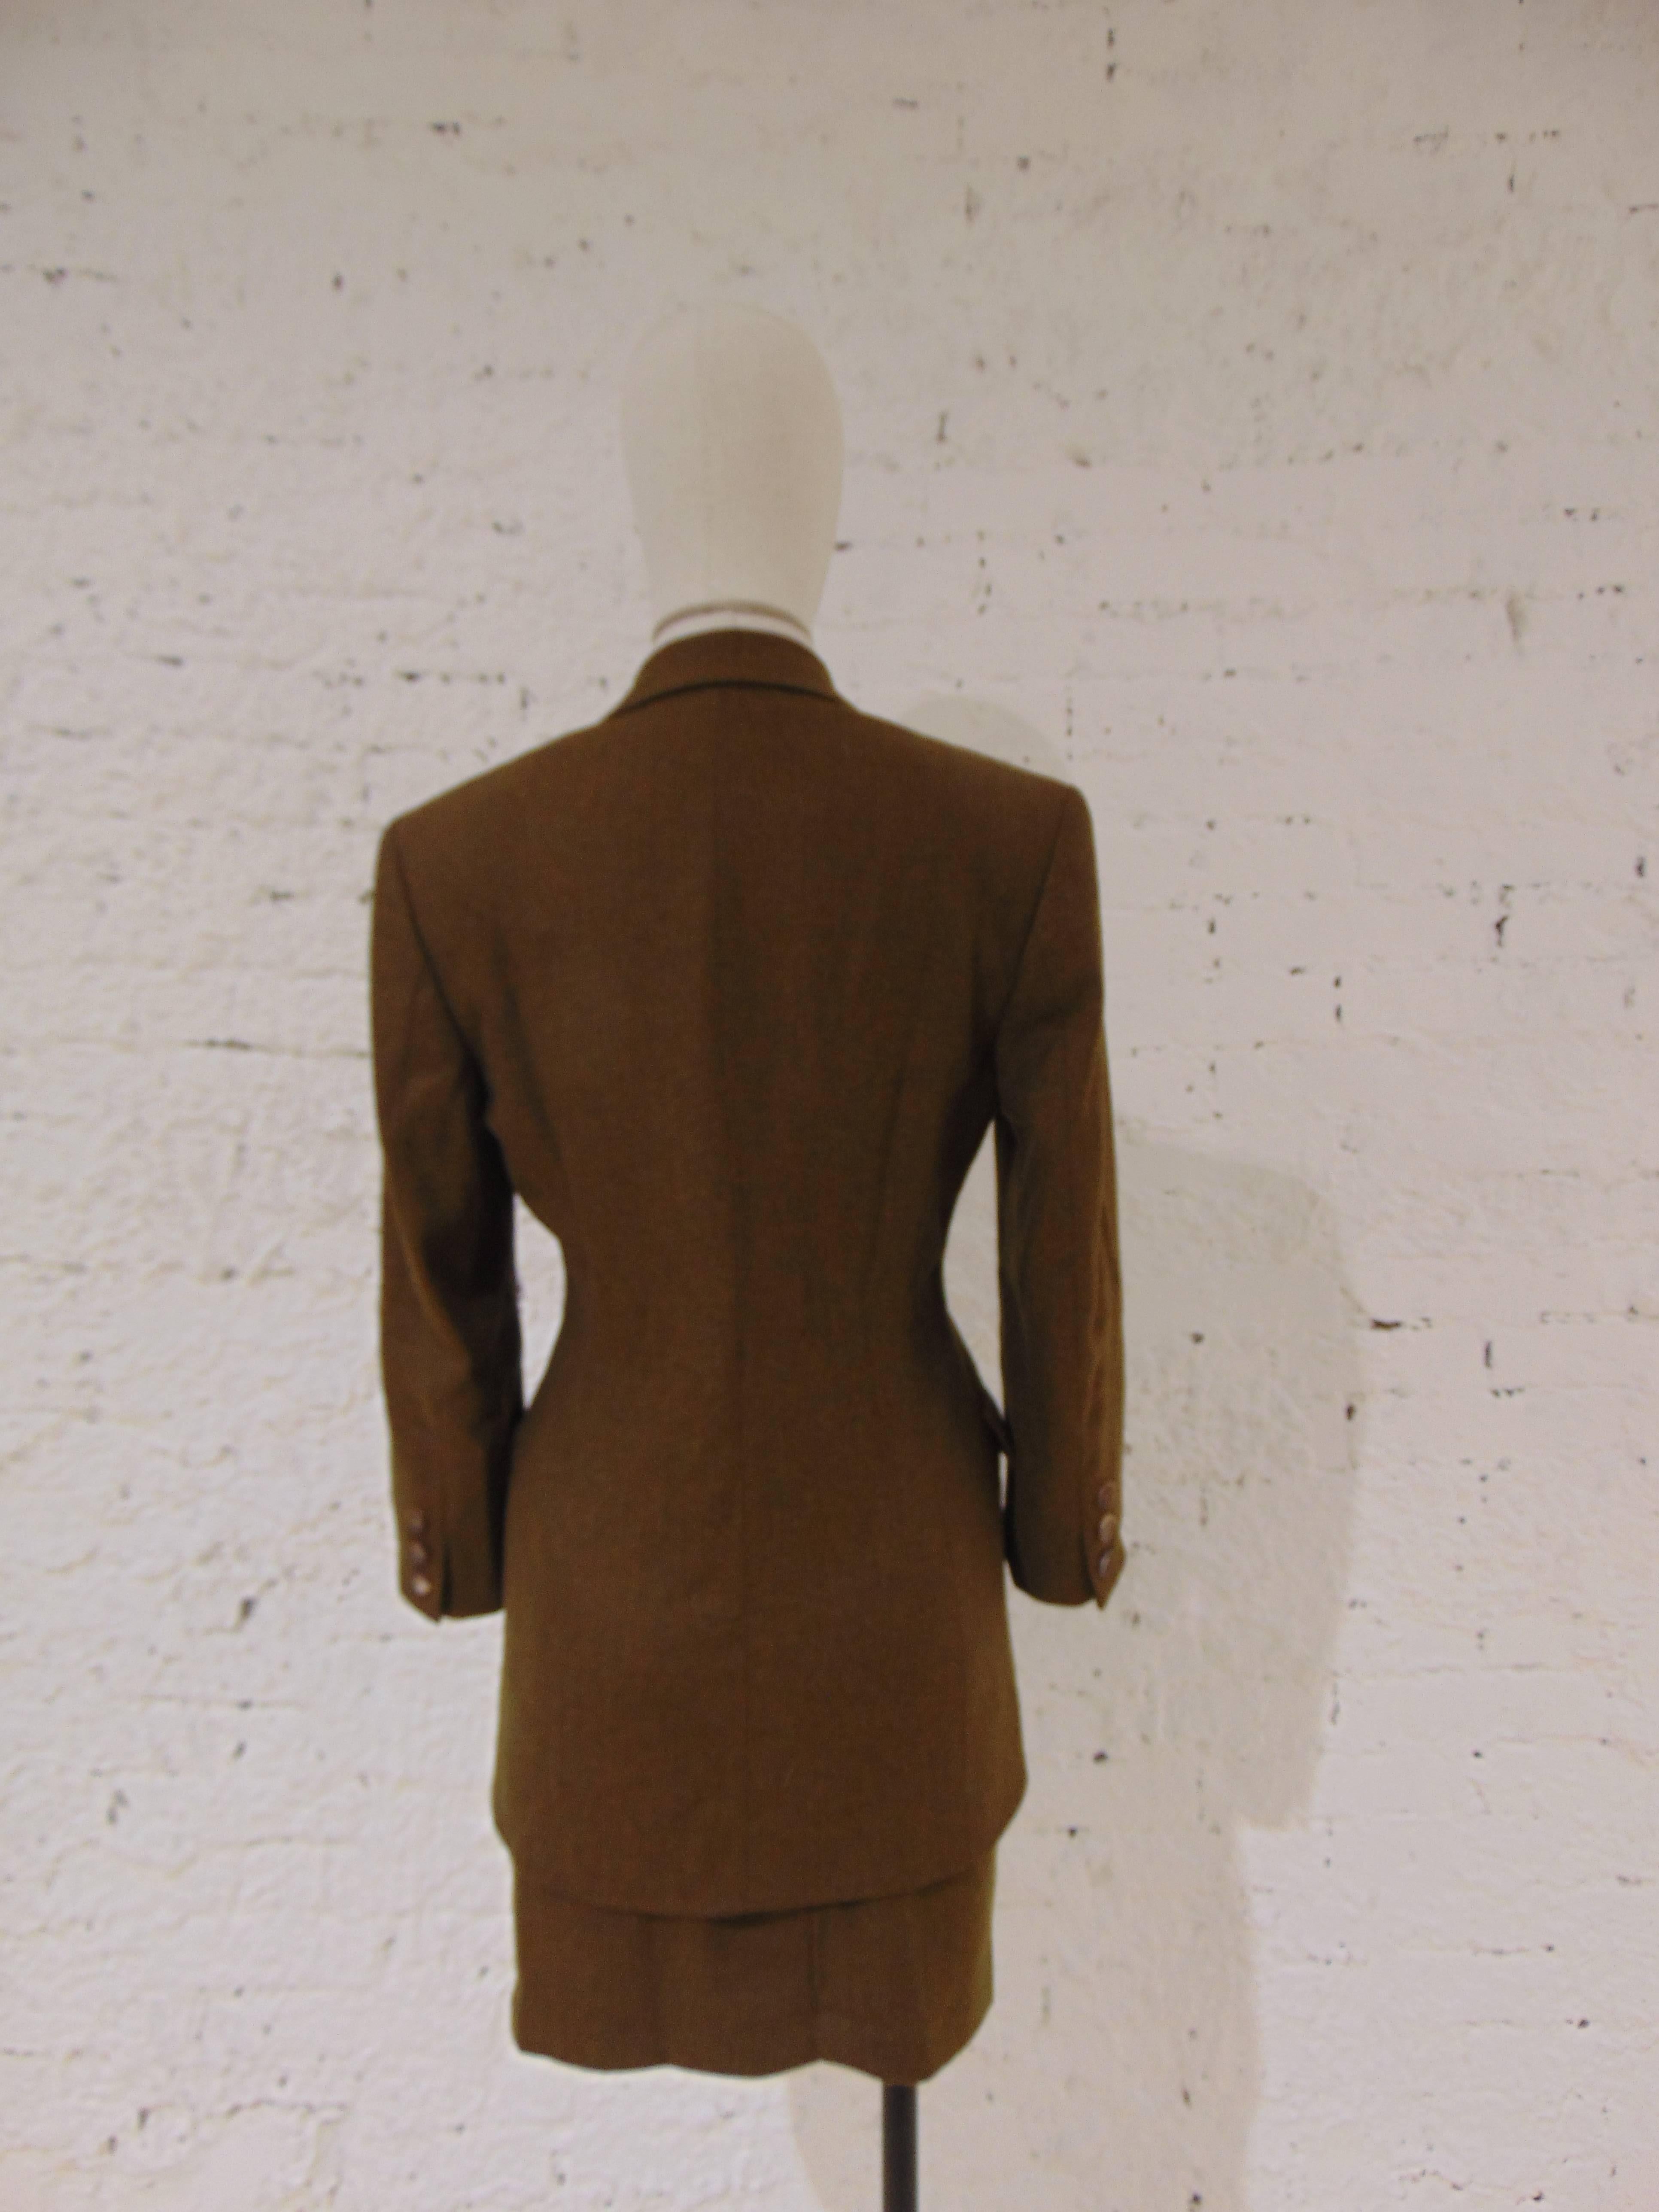 Prada brown skirt suit

totally made in italy in size 40